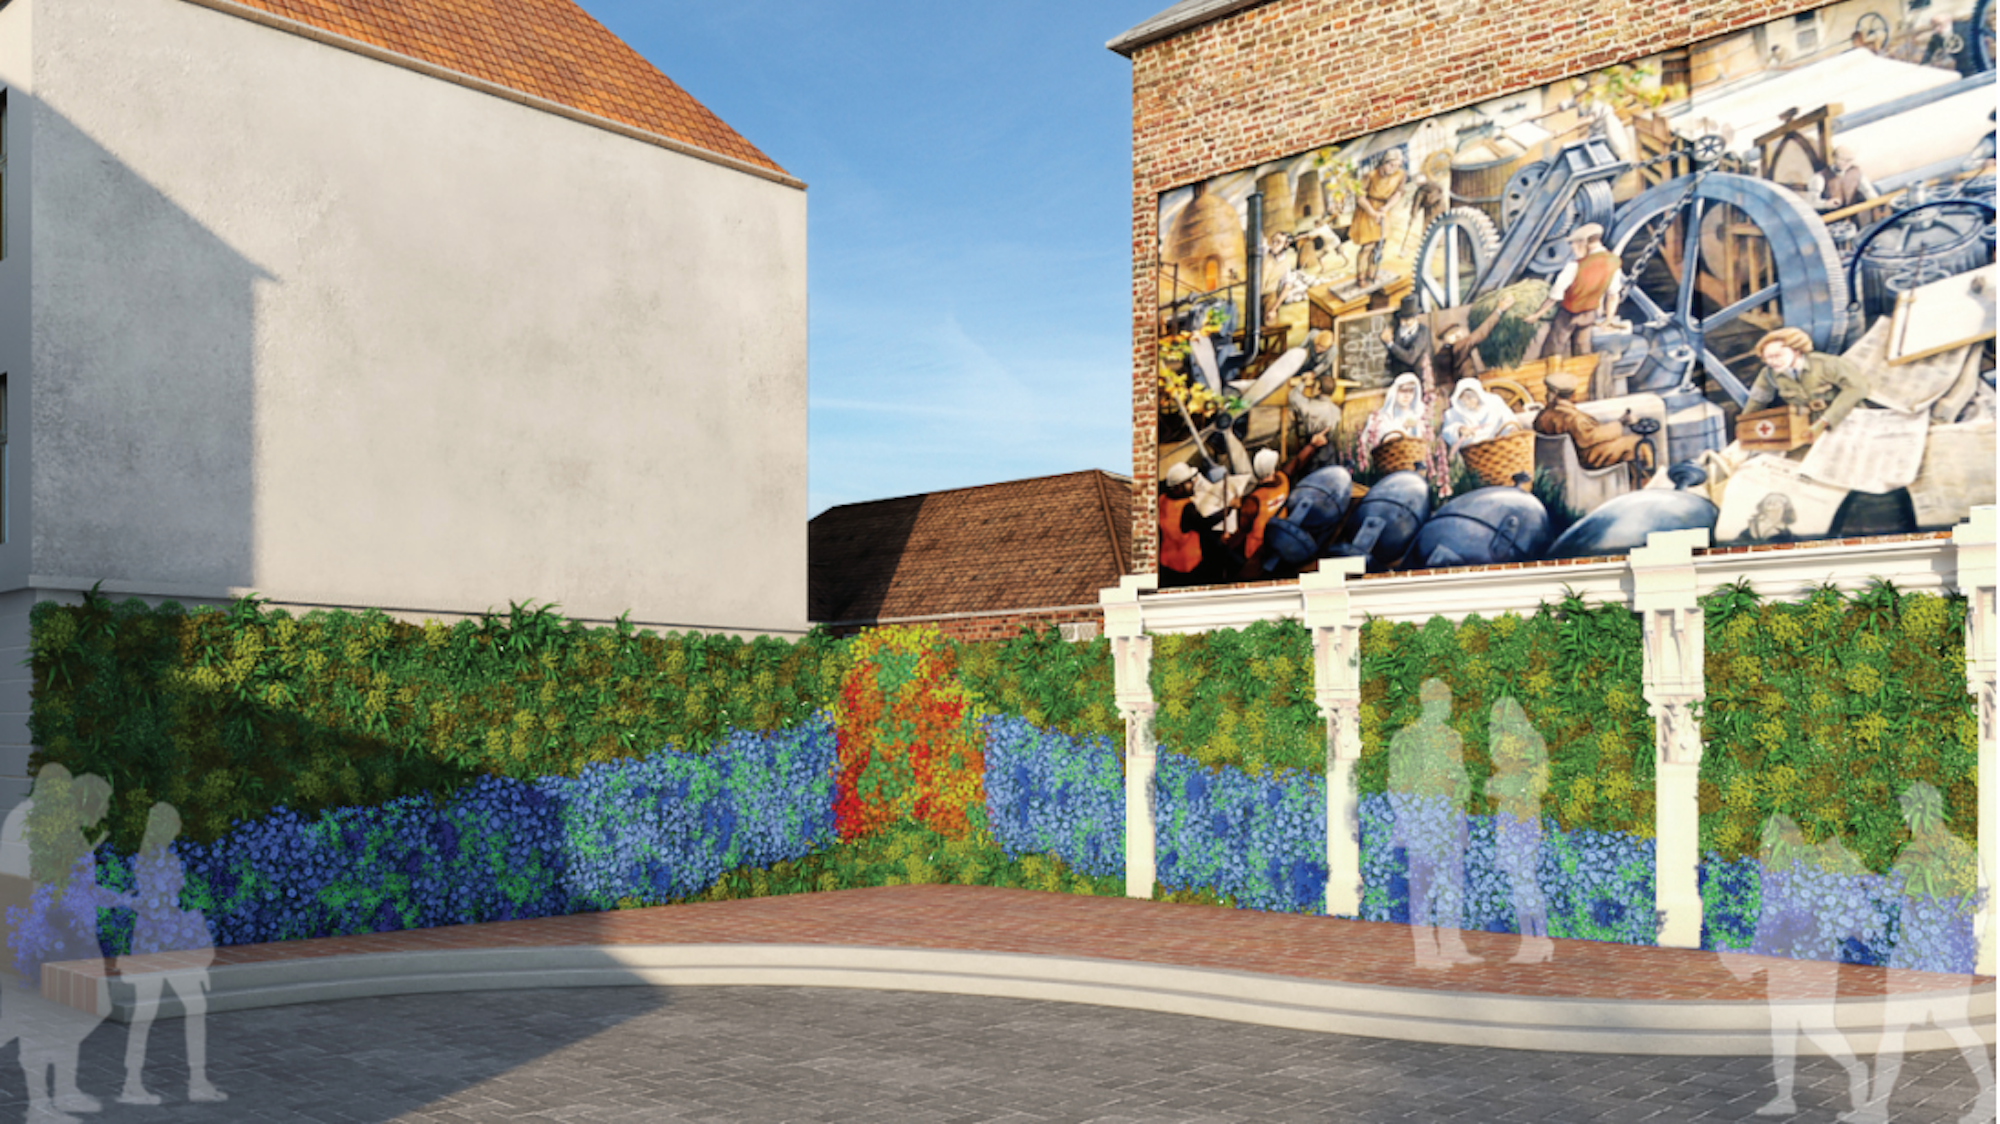 concept design of a street scape with a living wall and painted facade